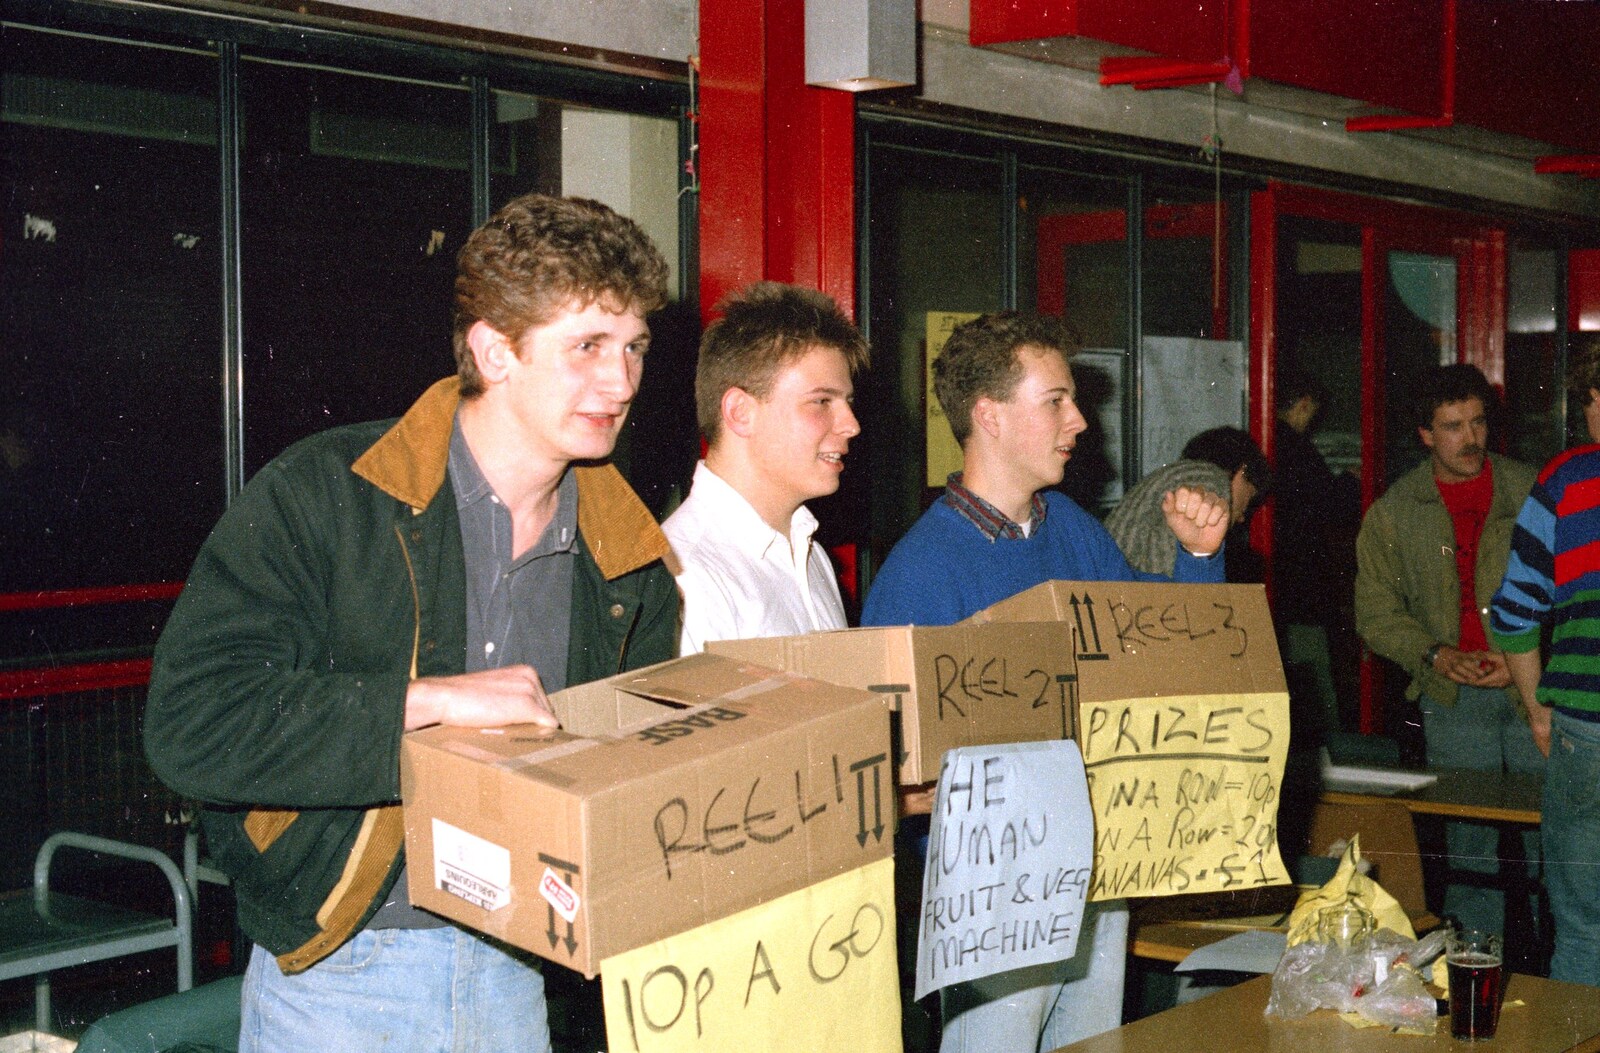 The lads of the human fruit and veg machine from Uni: Pirate RAG Bash, Games Nights and Brian's Beard, PPSU, Plymouth - 10th February 1987